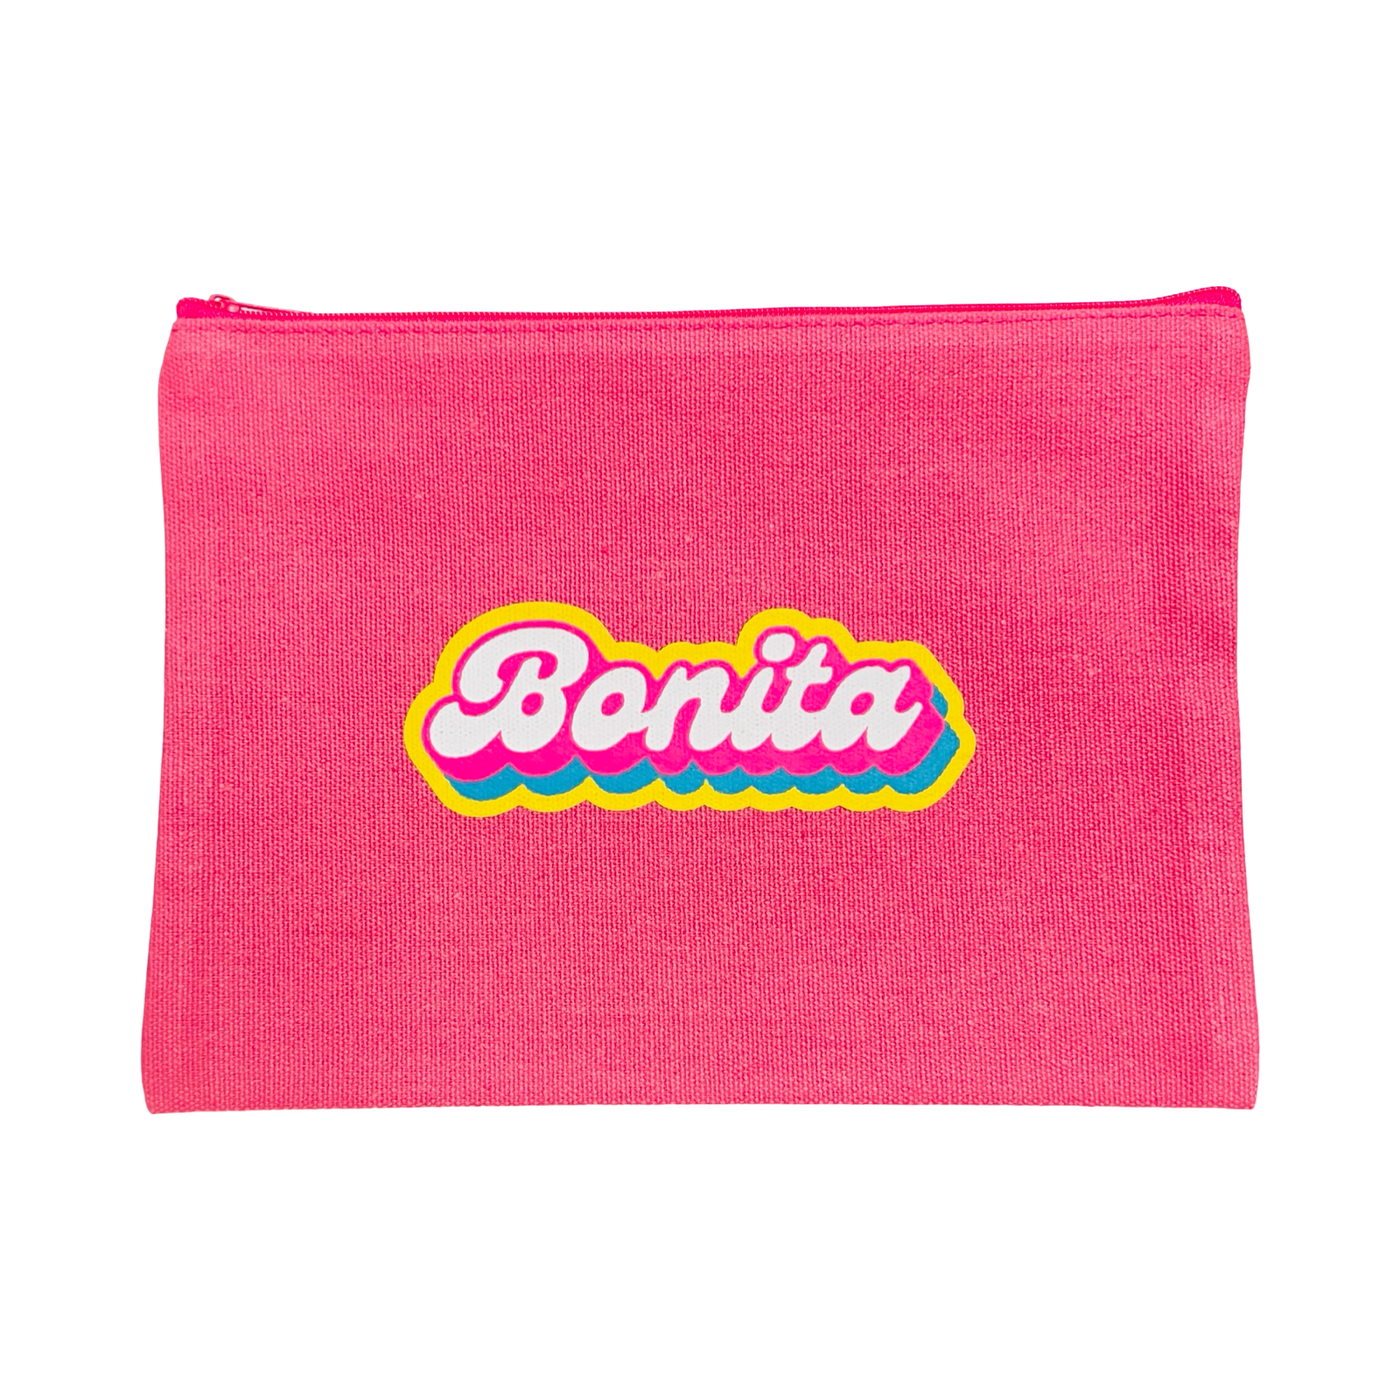 pink canvas zipper pouch with the word Bonita in white, yellow and blue lettering